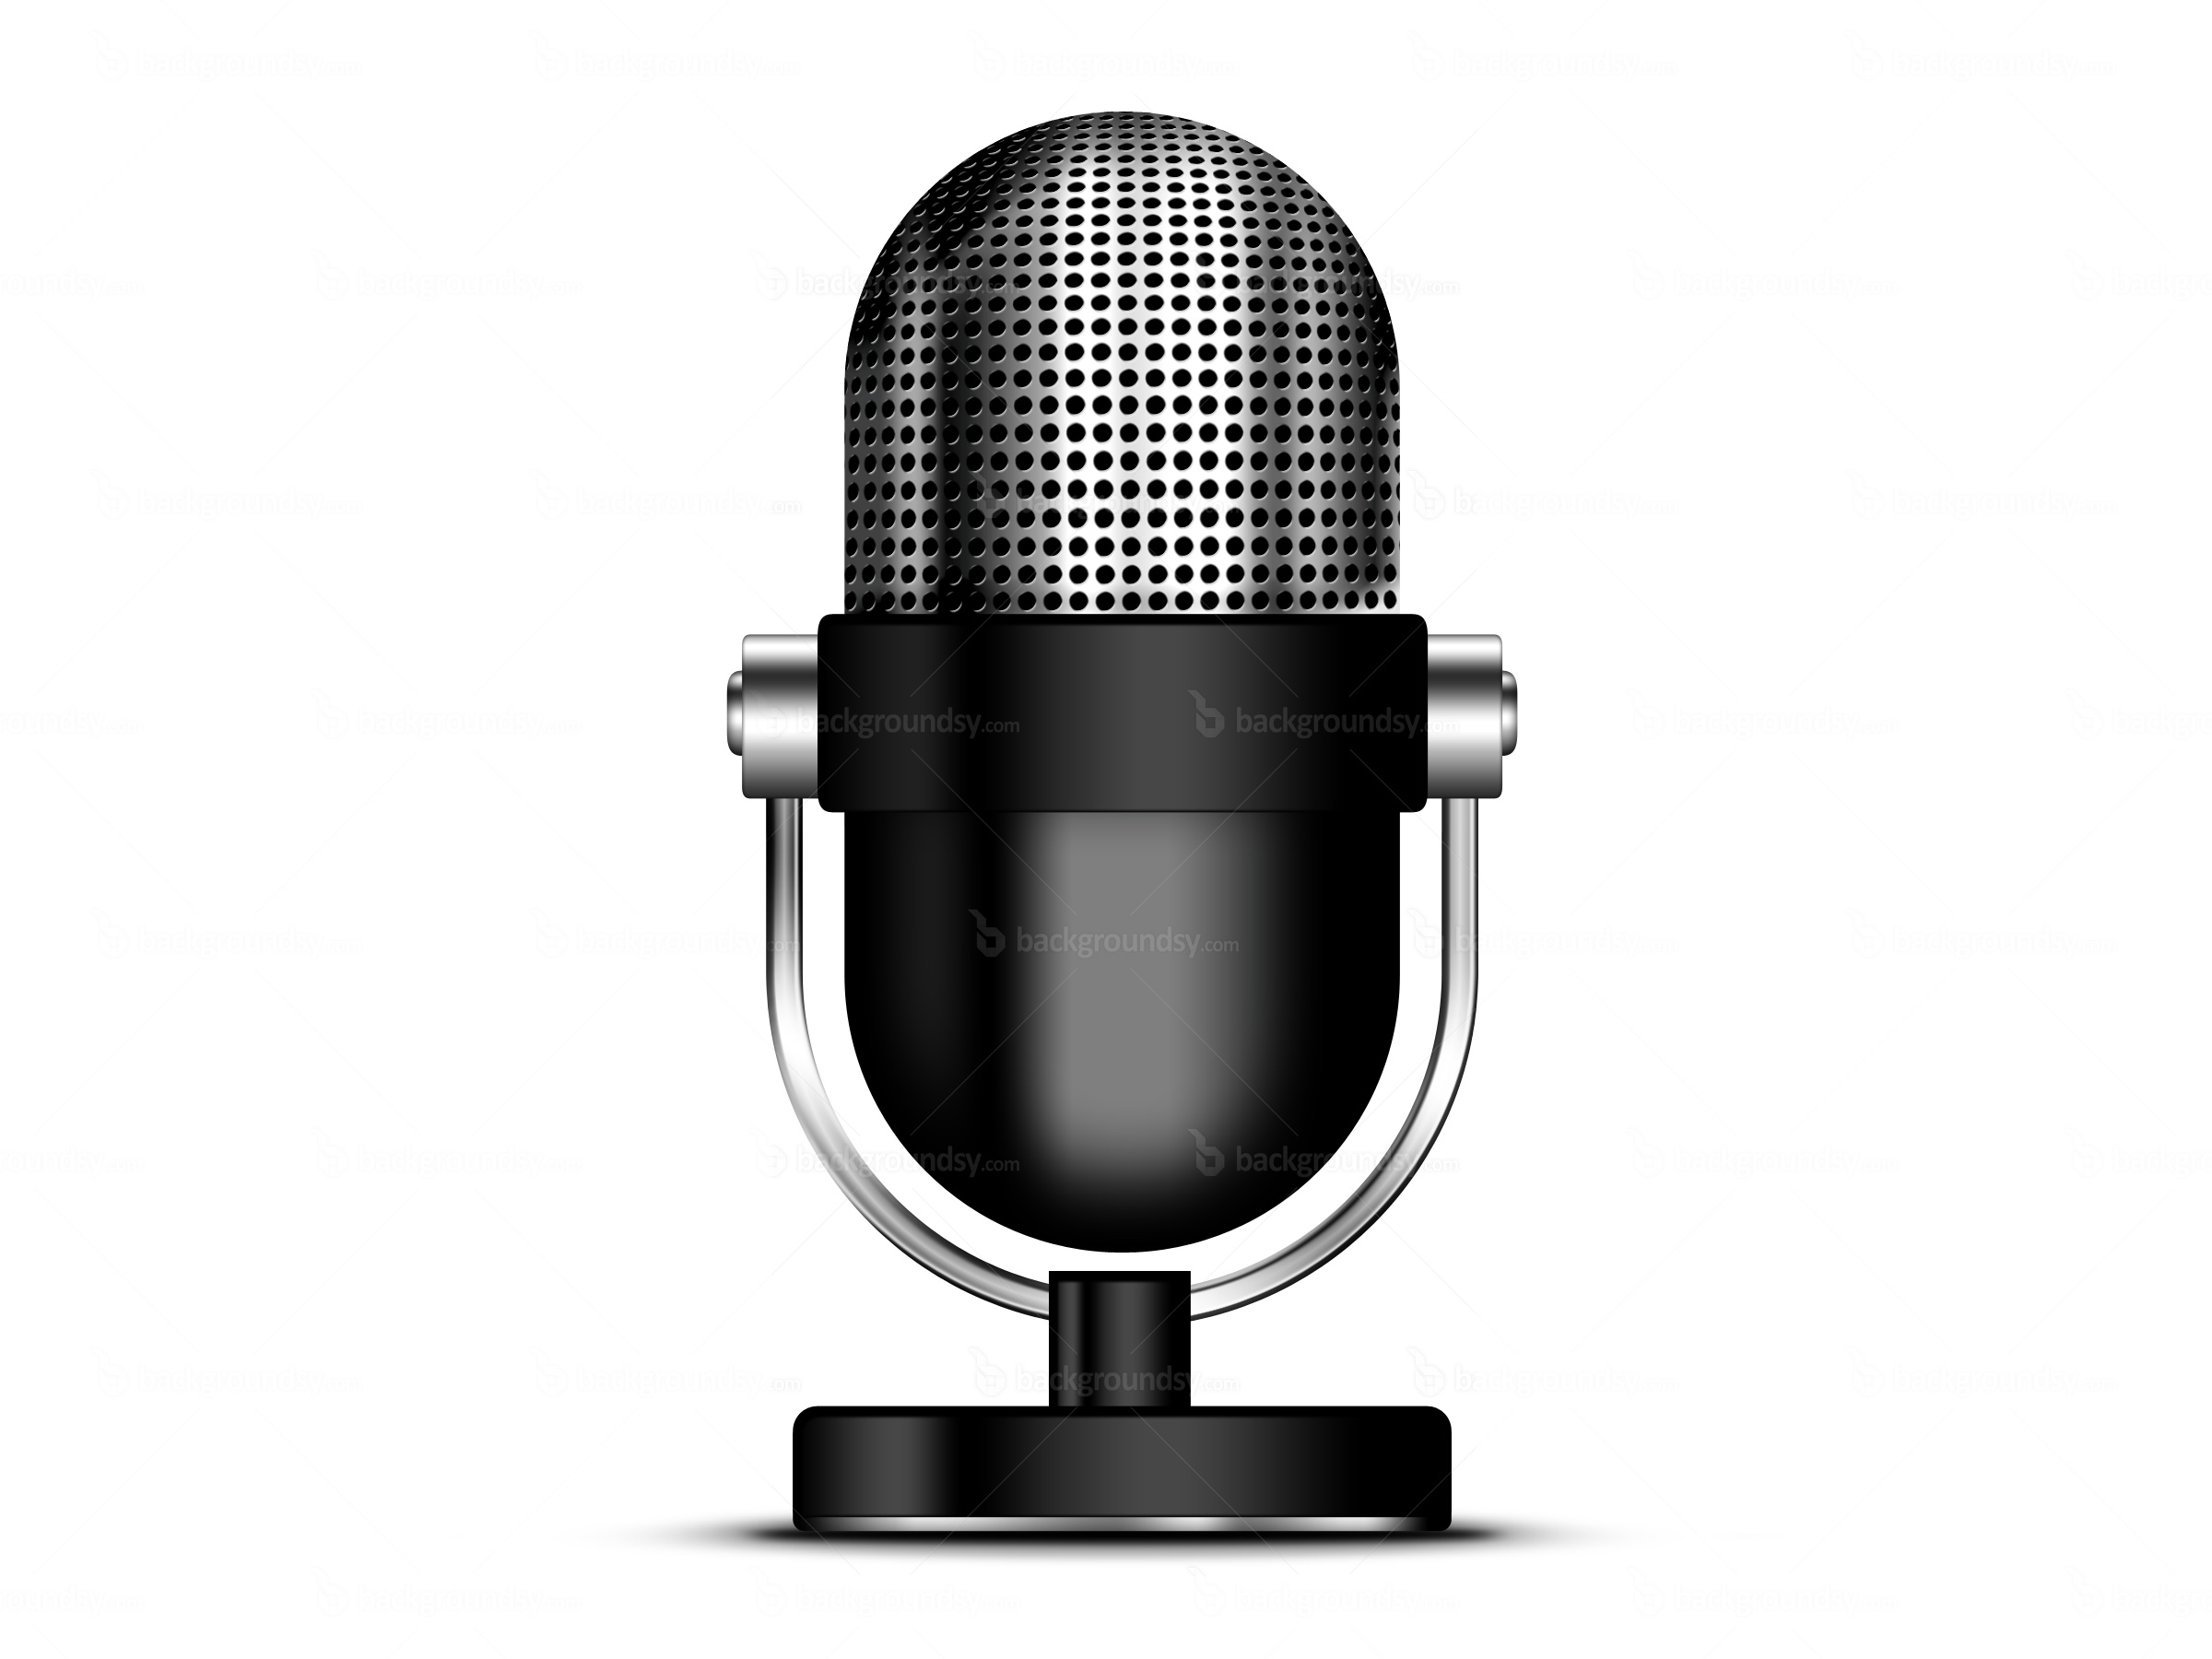 Old microphone icon Royalty Free Vector Image - VectorStock